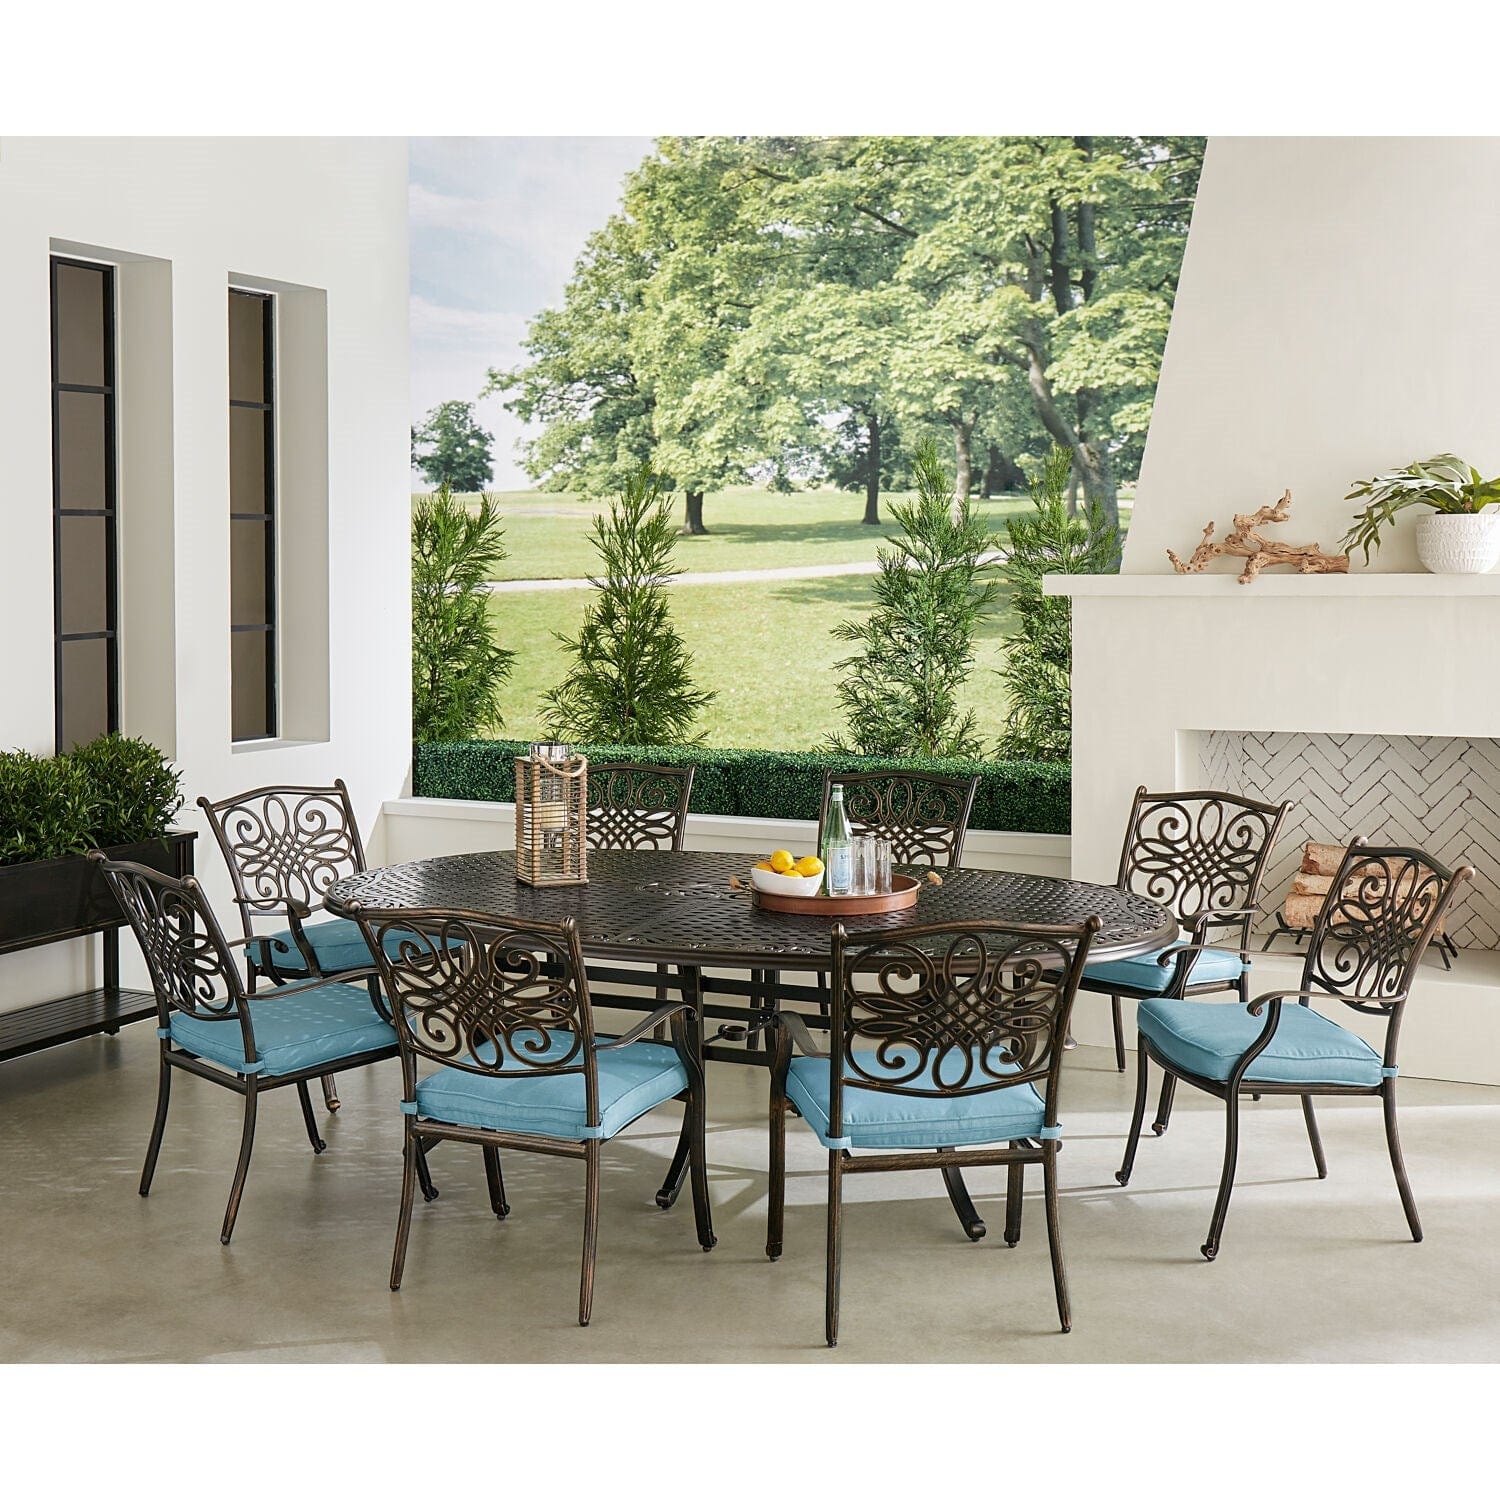 Hanover Outdoor Dining Set Hanover Traditions 9-Piece  Aluminium Frame Dining Set in Blue with Eight Stationary Dining Chairs and 95-in. x 60-in. Oval Cast Dining Table | TRADDN9PCOV-BLU